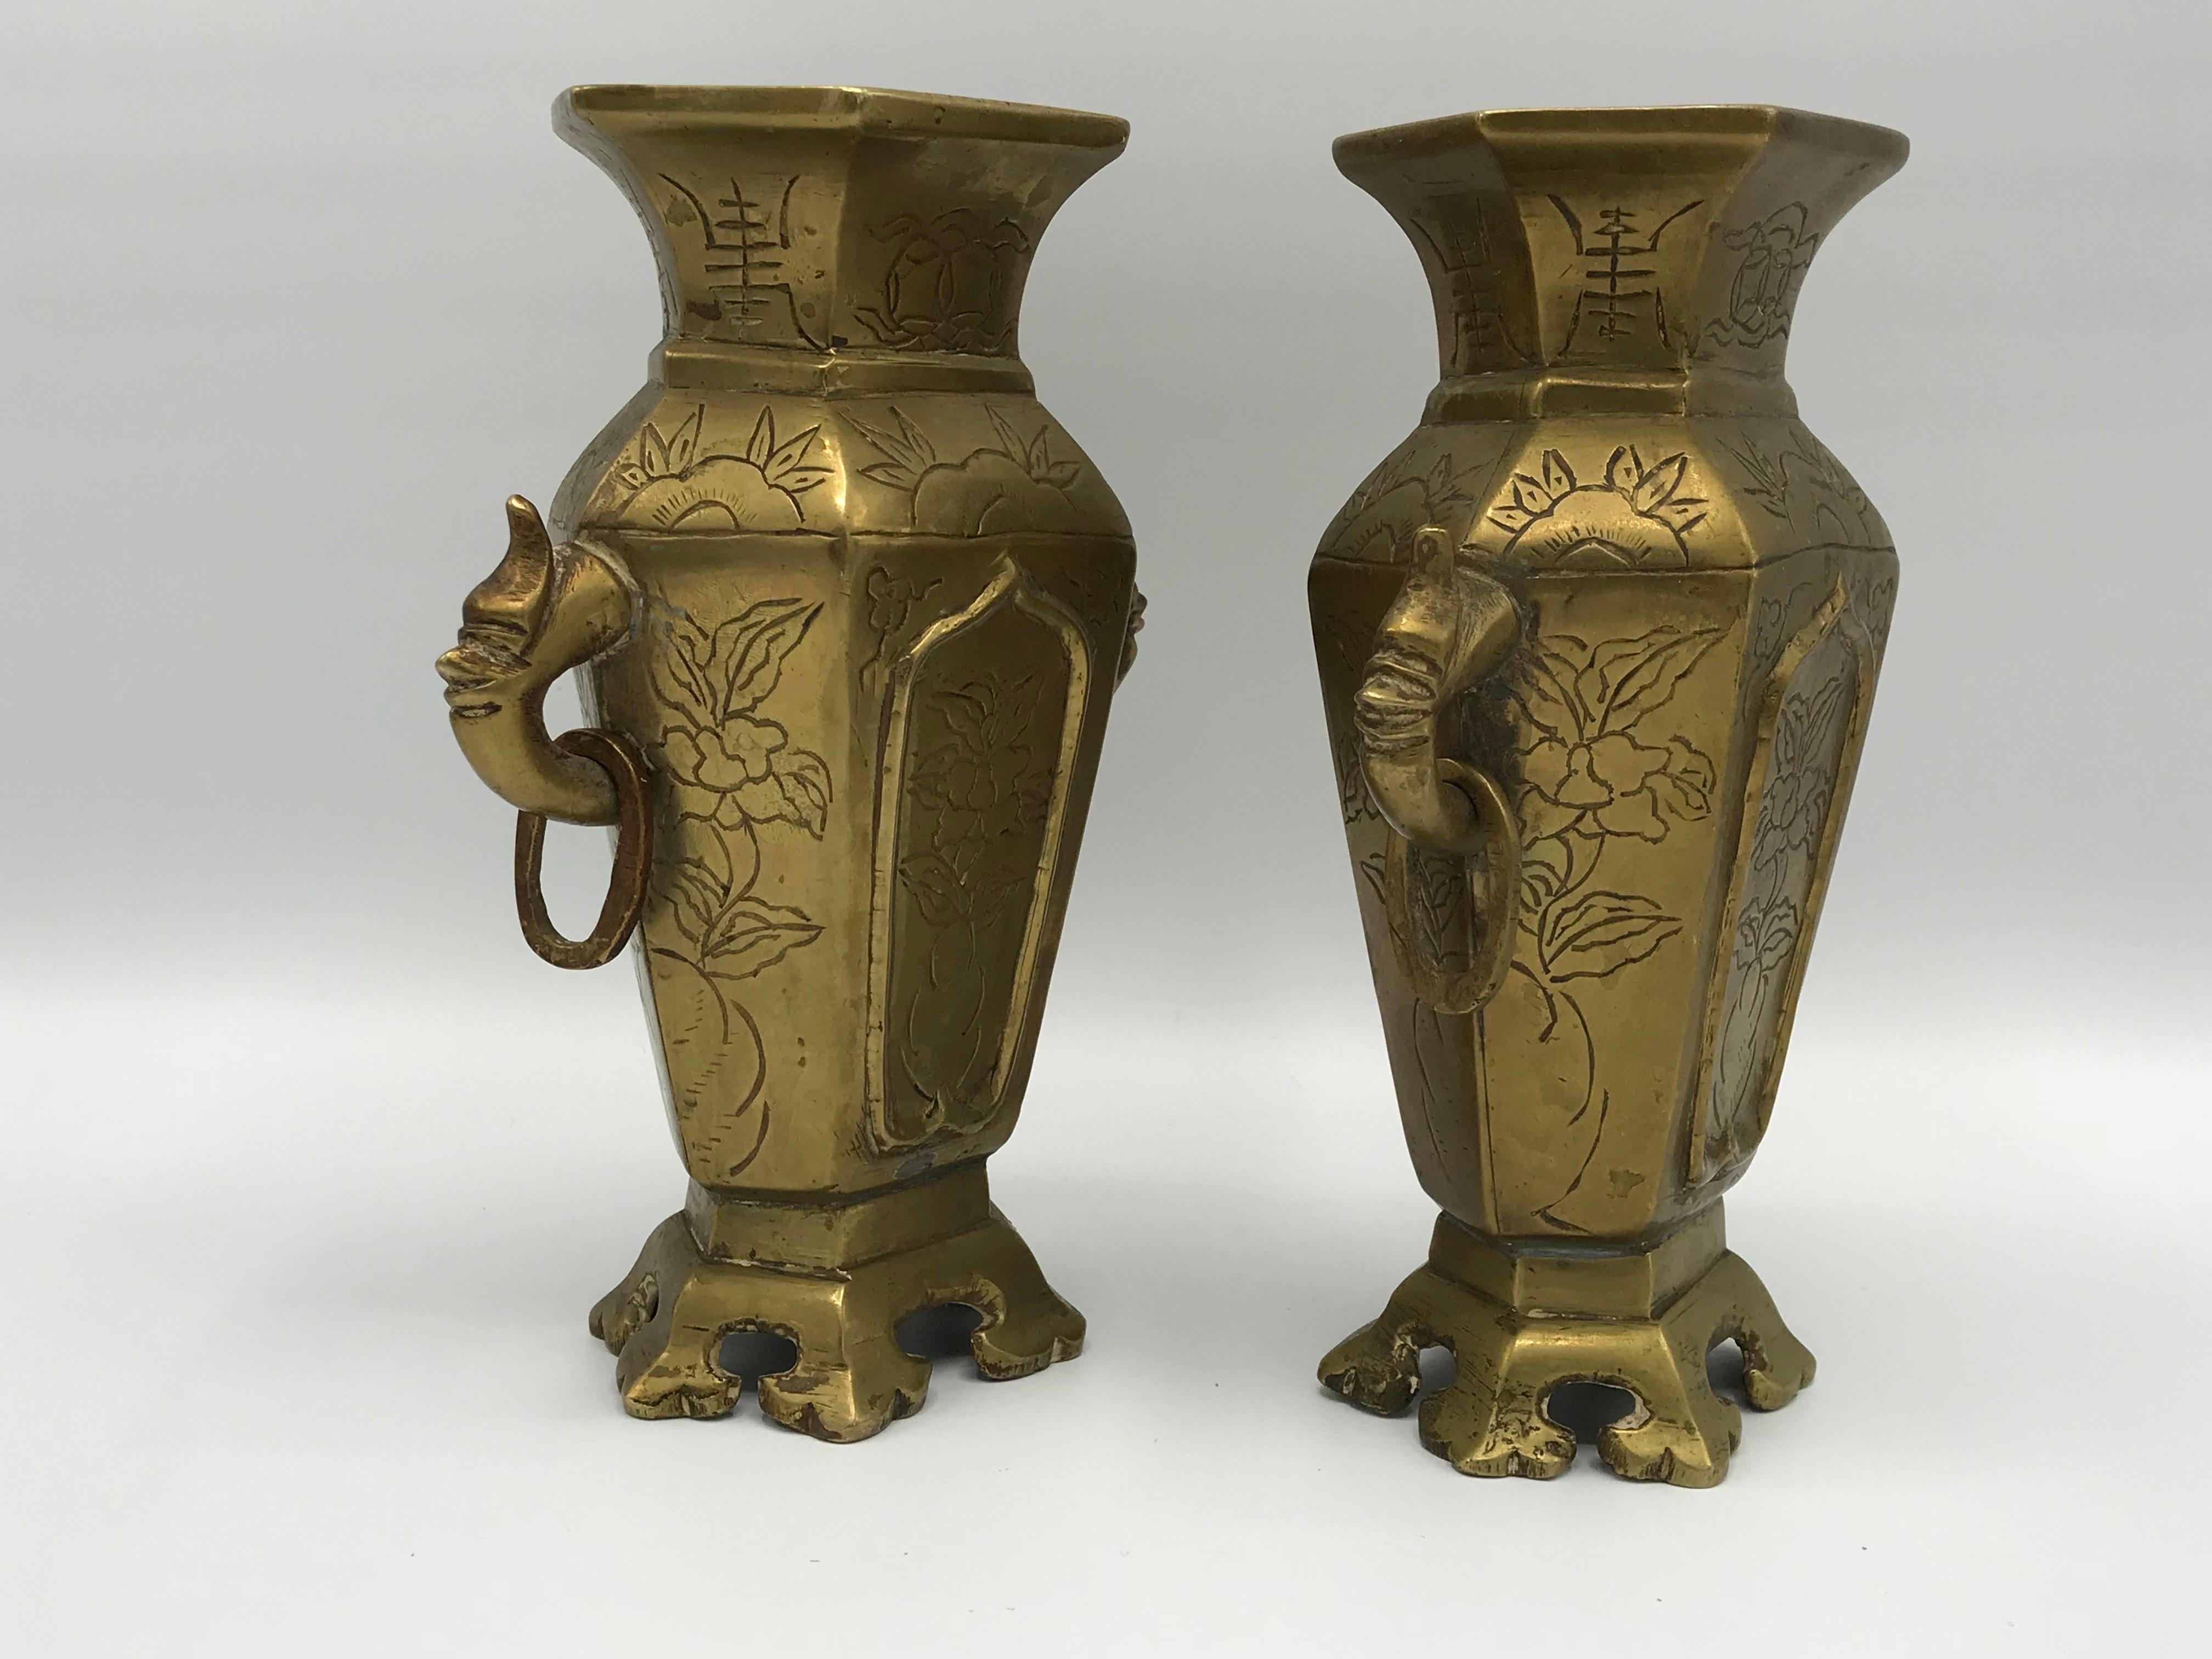 Offered is a stunning, pair of 1950s brass chinoiserie censor vases. The pair stands 7.75in tall on their ornate footing. Fabulous ornate floral motif and patina all-over. One censor is missing a ring on the side, please see photos 4, 5, 9, and 10.